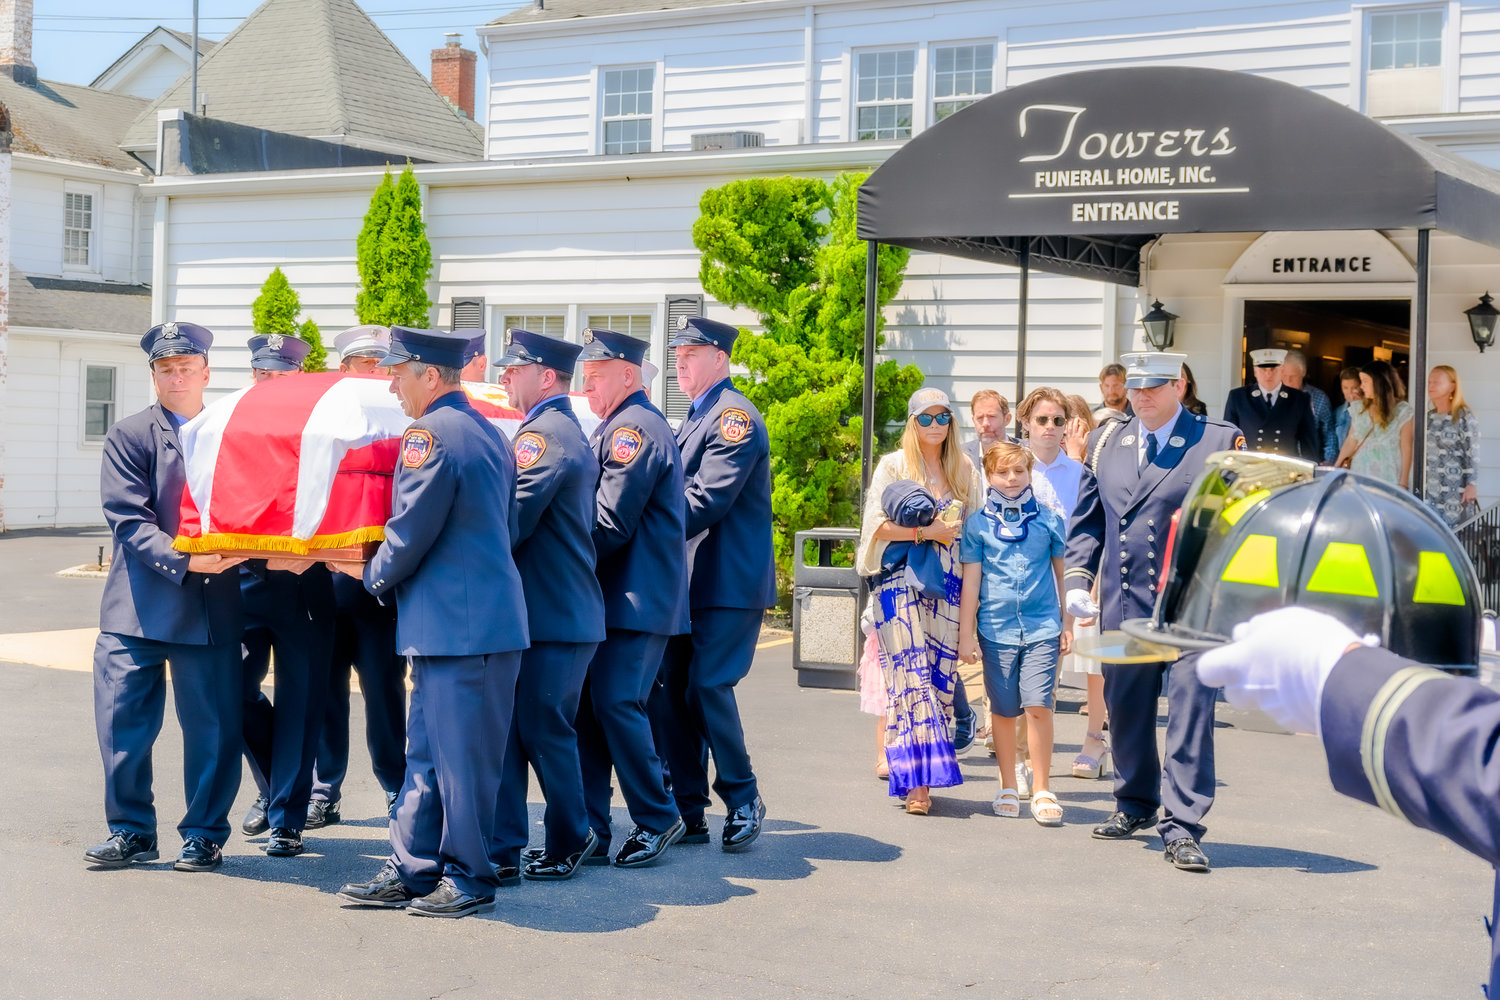 Firefighters of Ladder 137, in Rockaway Beach, carried the casket of Casey Skudin after an hour-long FDNY service at the Towers Funeral Home in Oceanside.